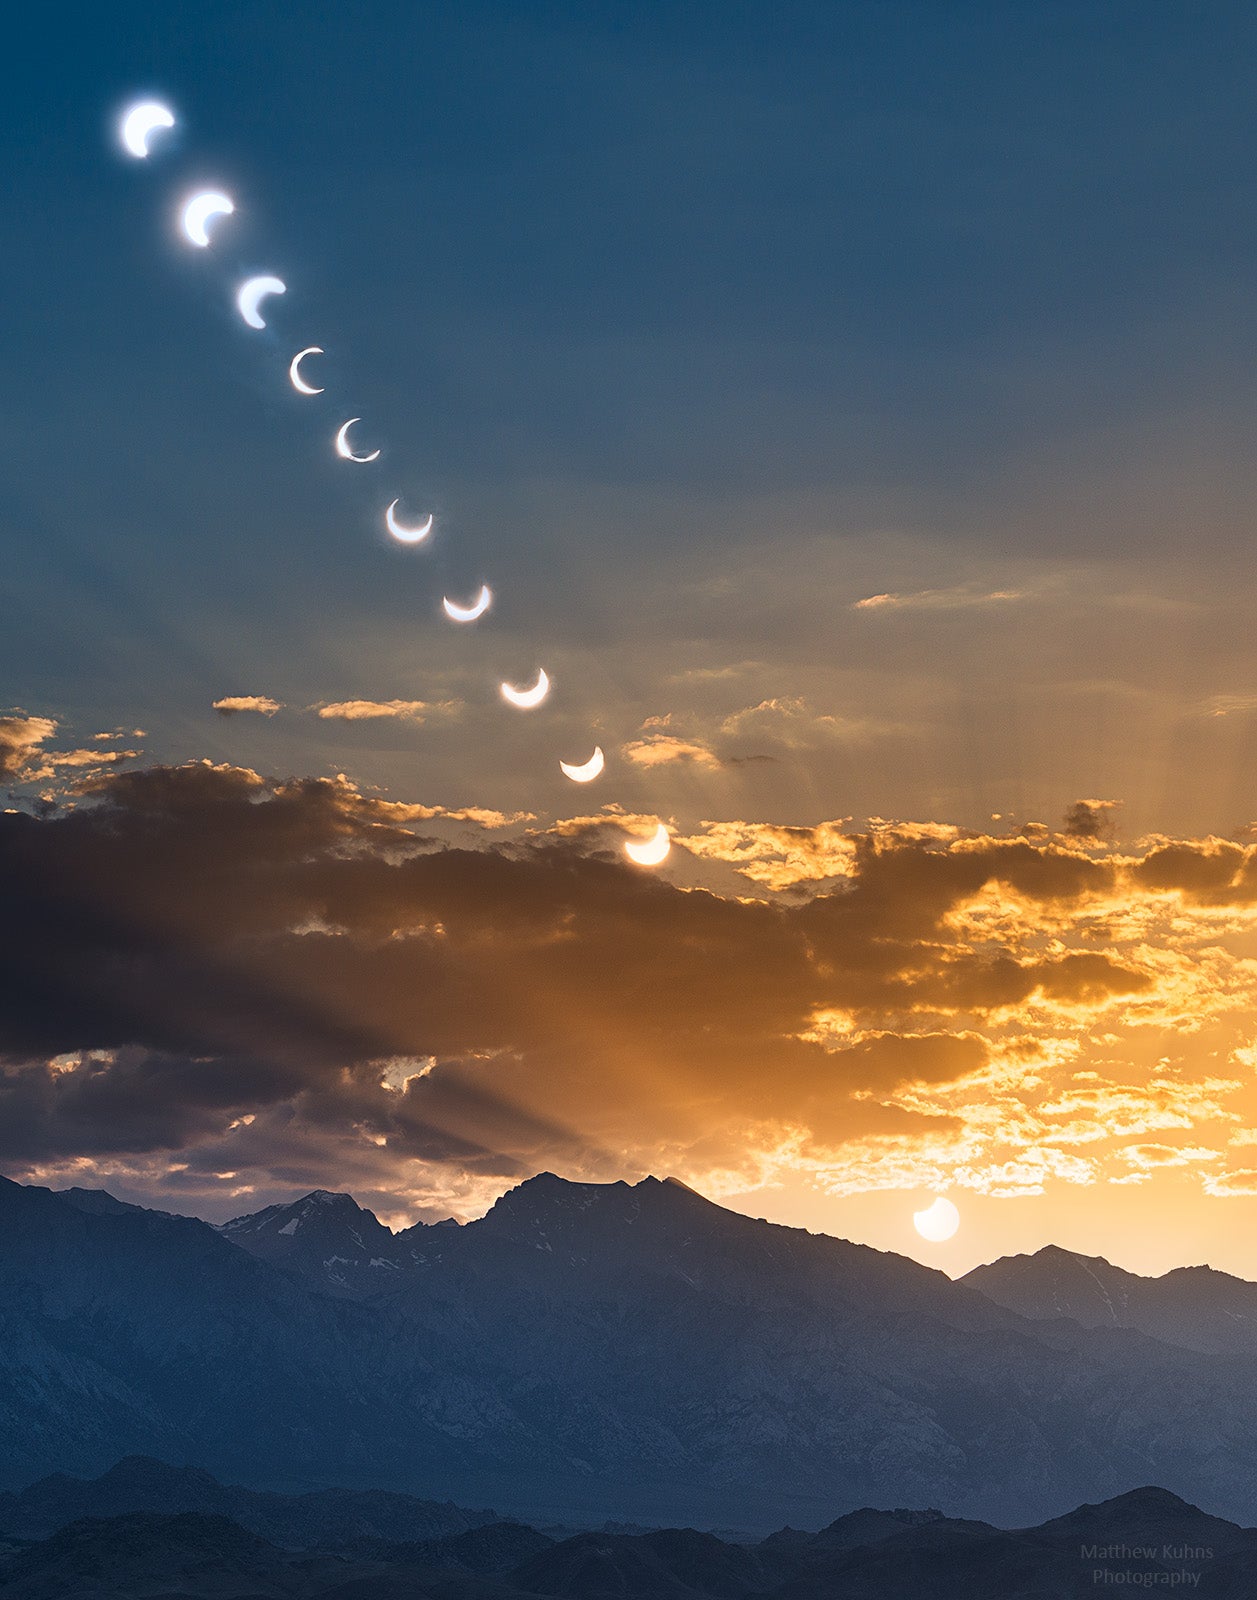 Capturing the Eclipse with Matthew Kuhns